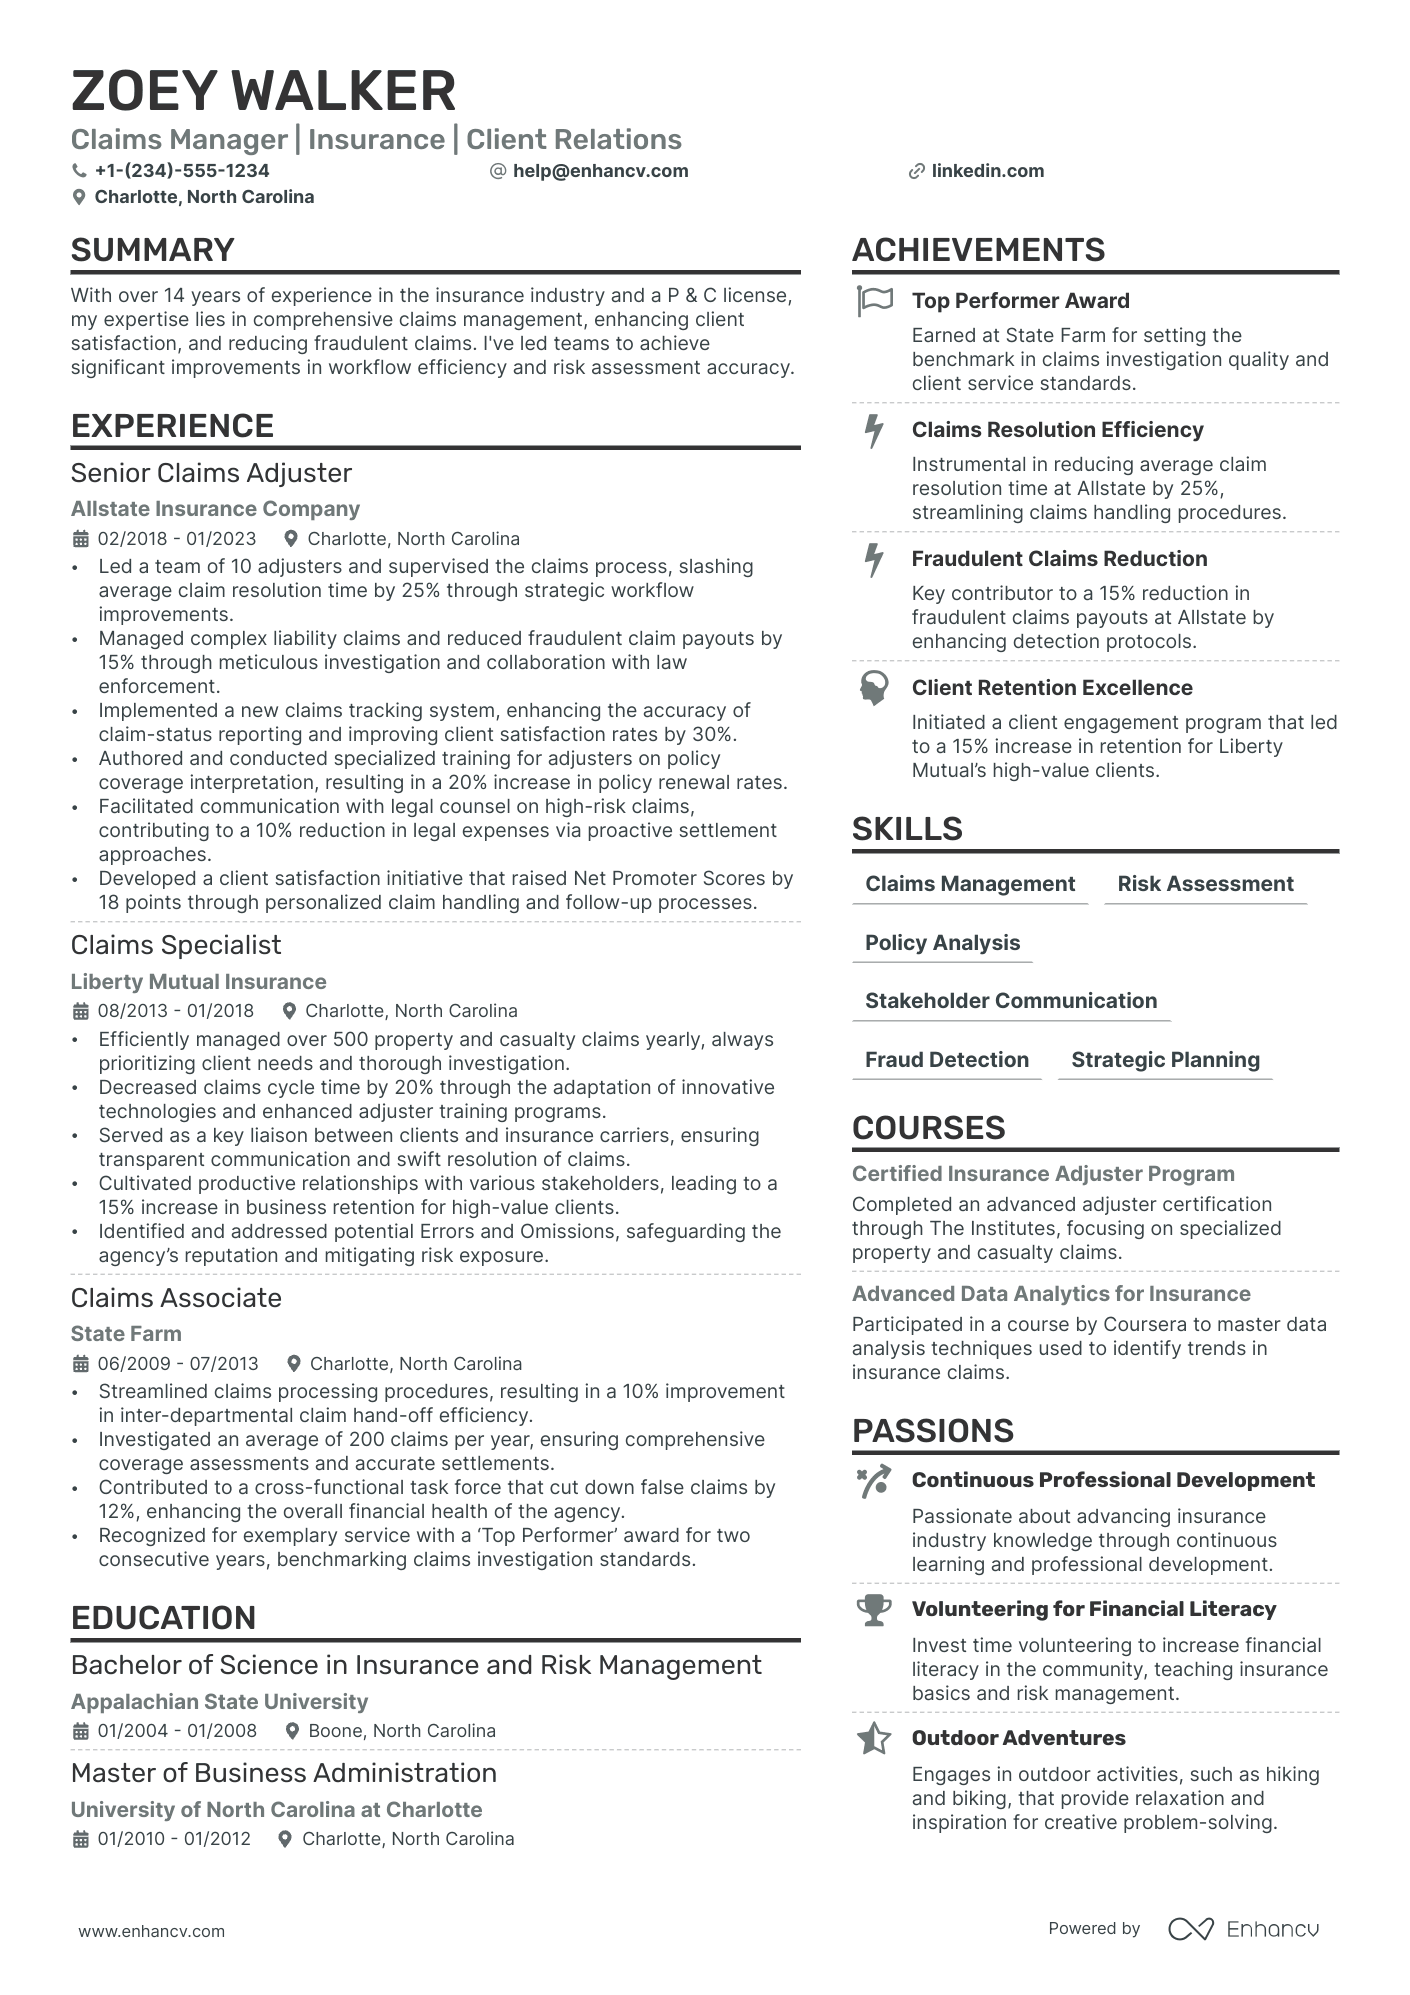 Claims Manager resume example